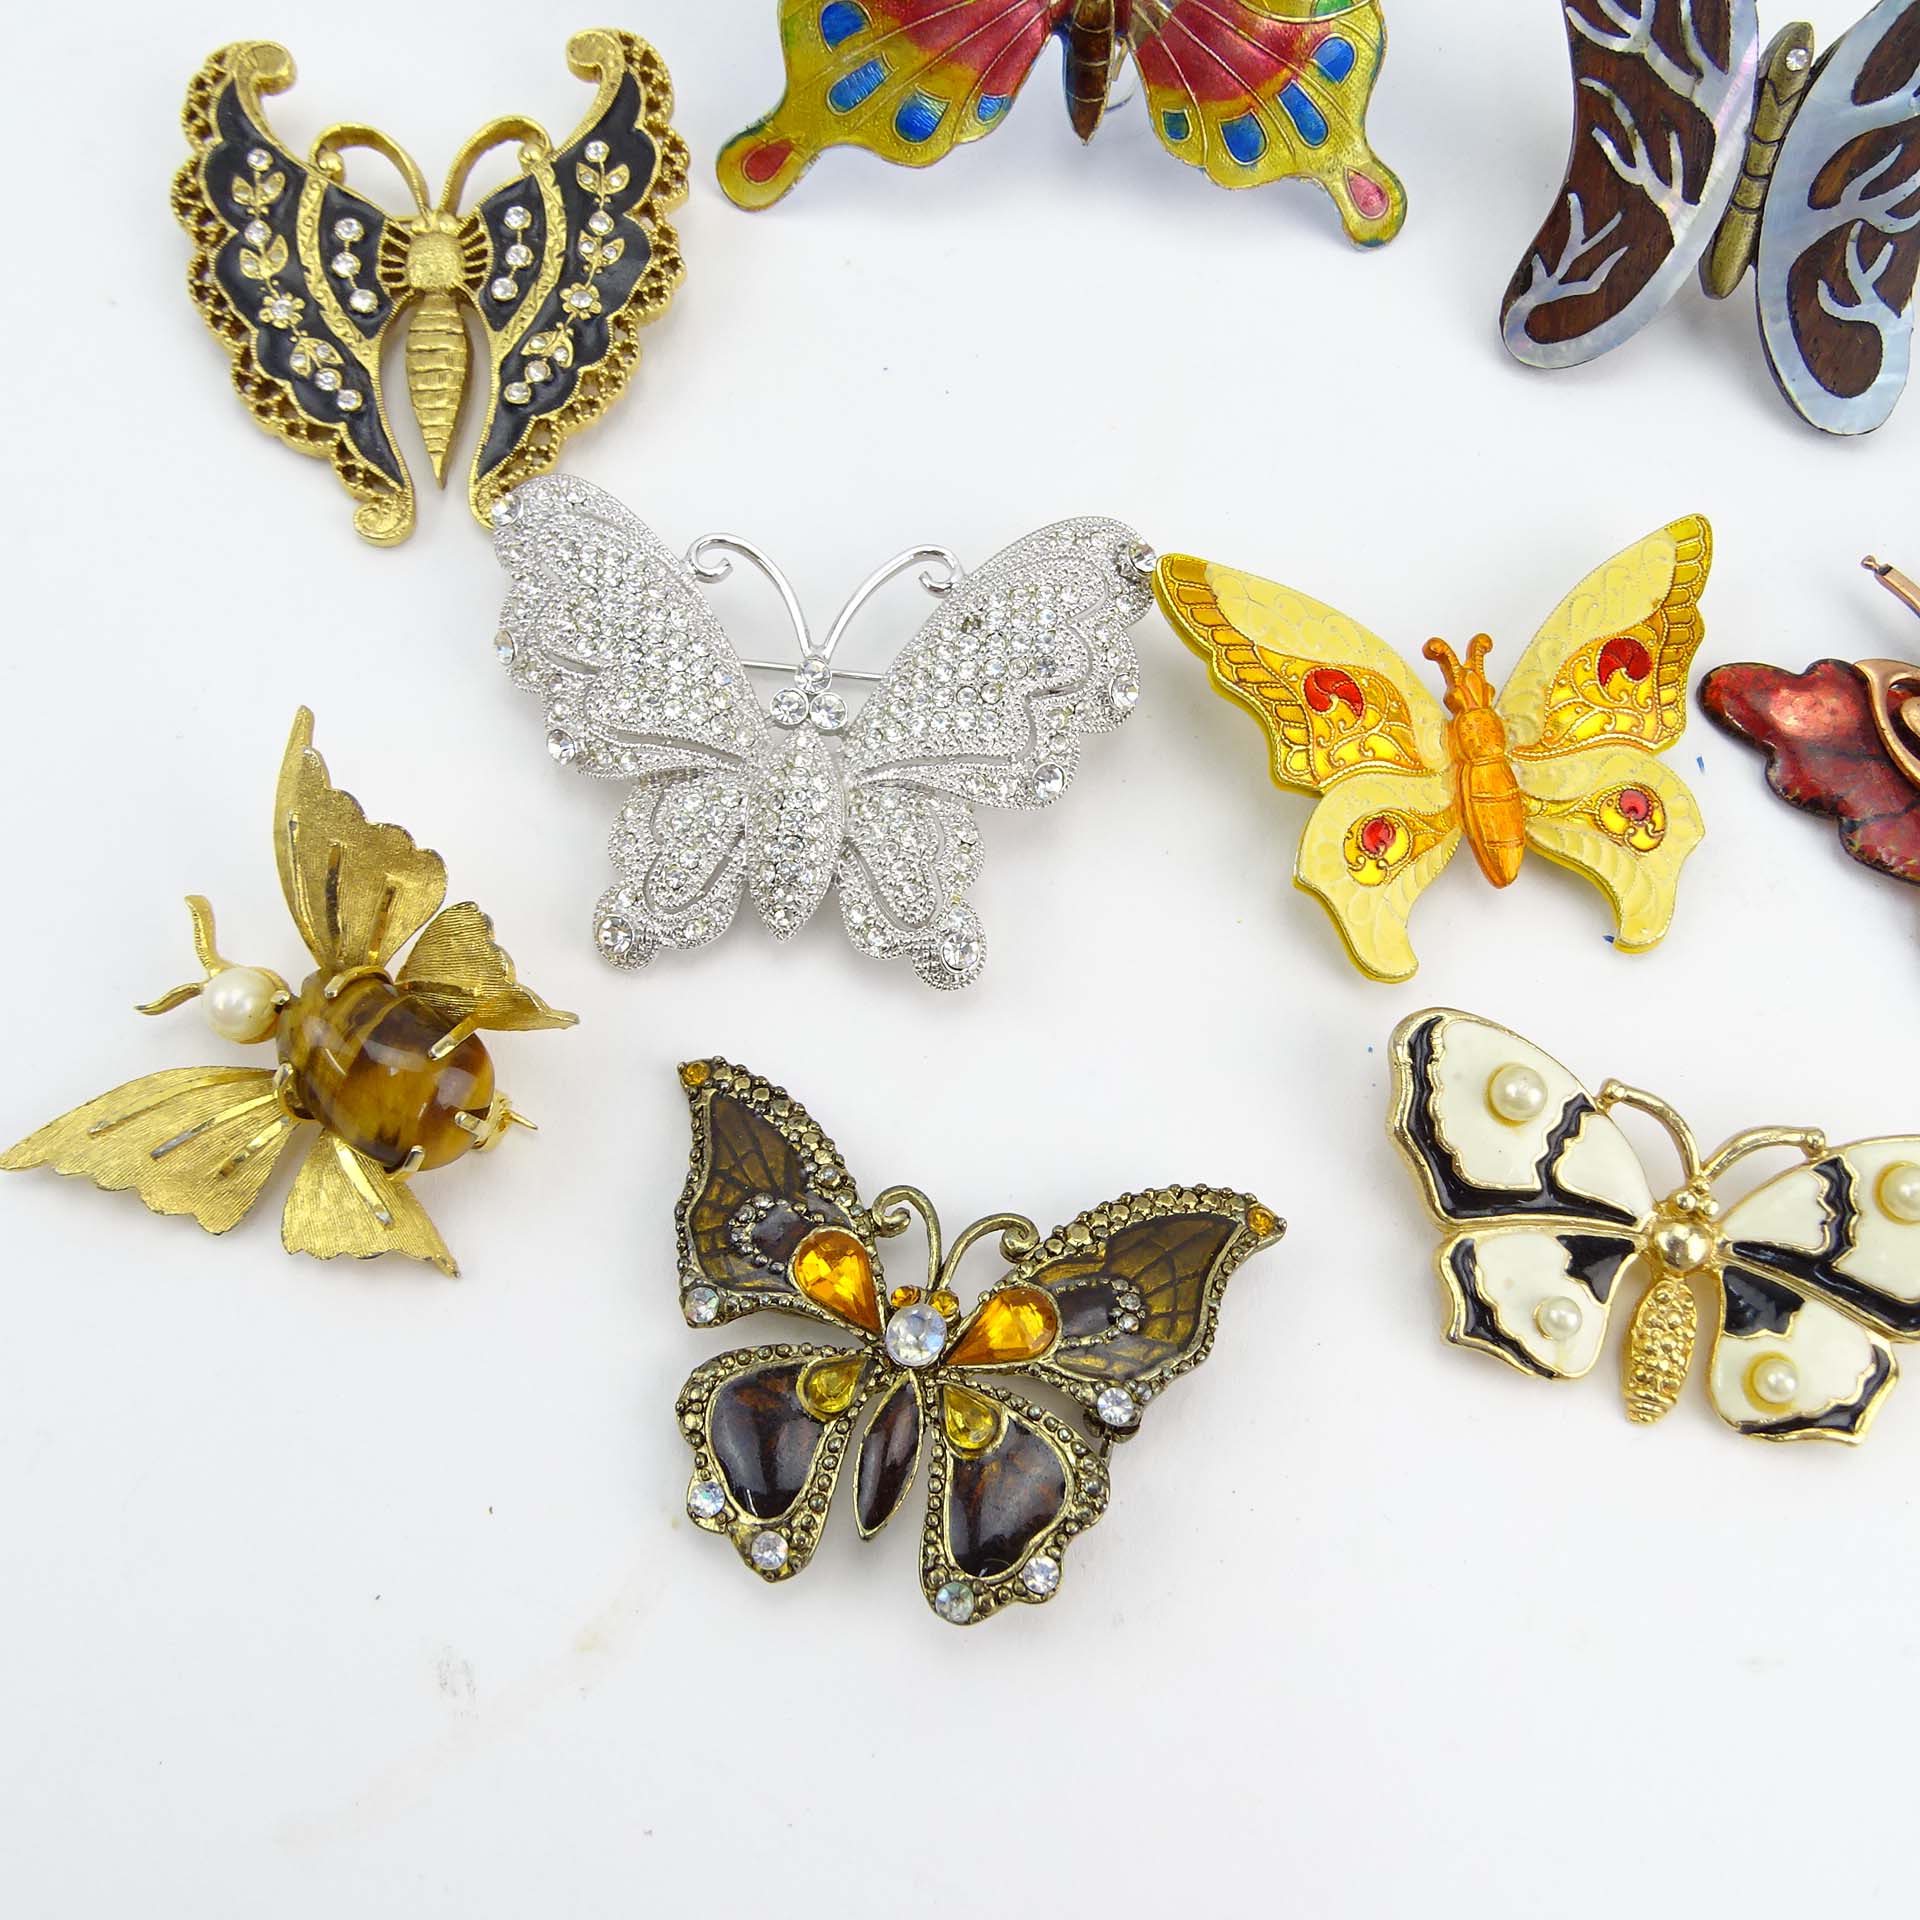 Collection of Fifteen (15) Fashion Butterfly Brooches decorated variously with enamel and faux gem stones.